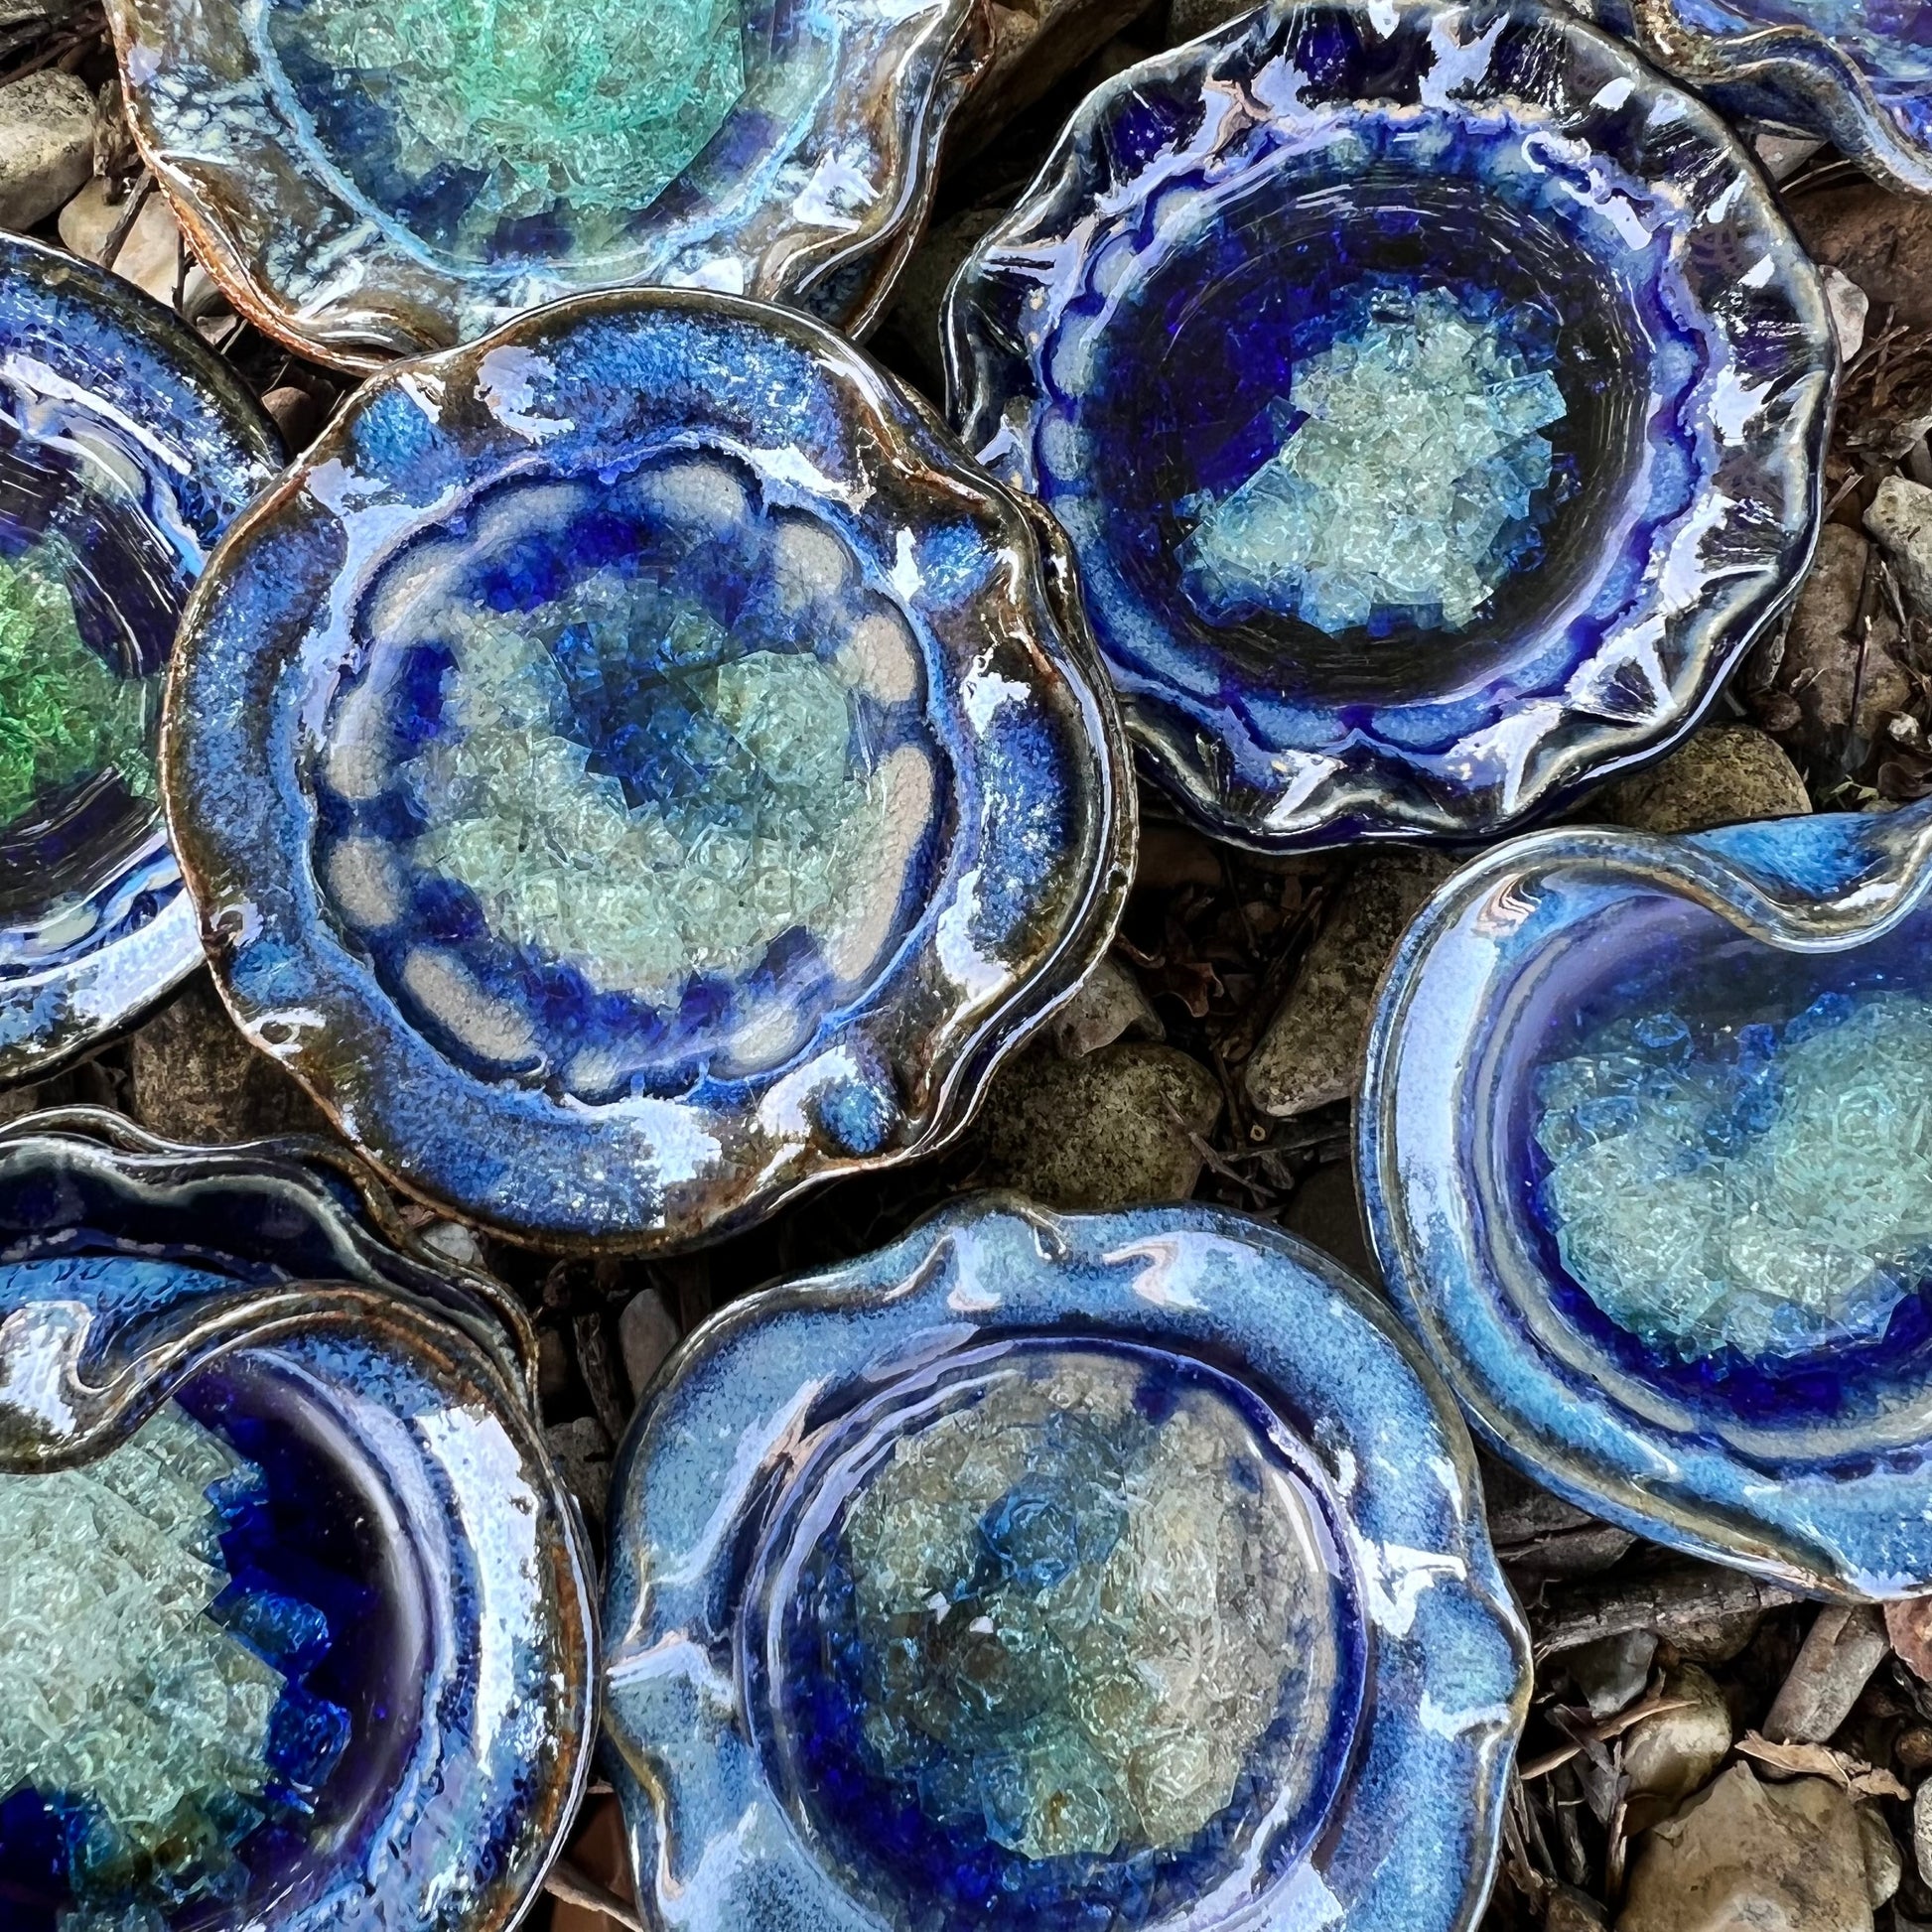 beautiful blues  heart and round crackled glass displayed on leaves and rocks